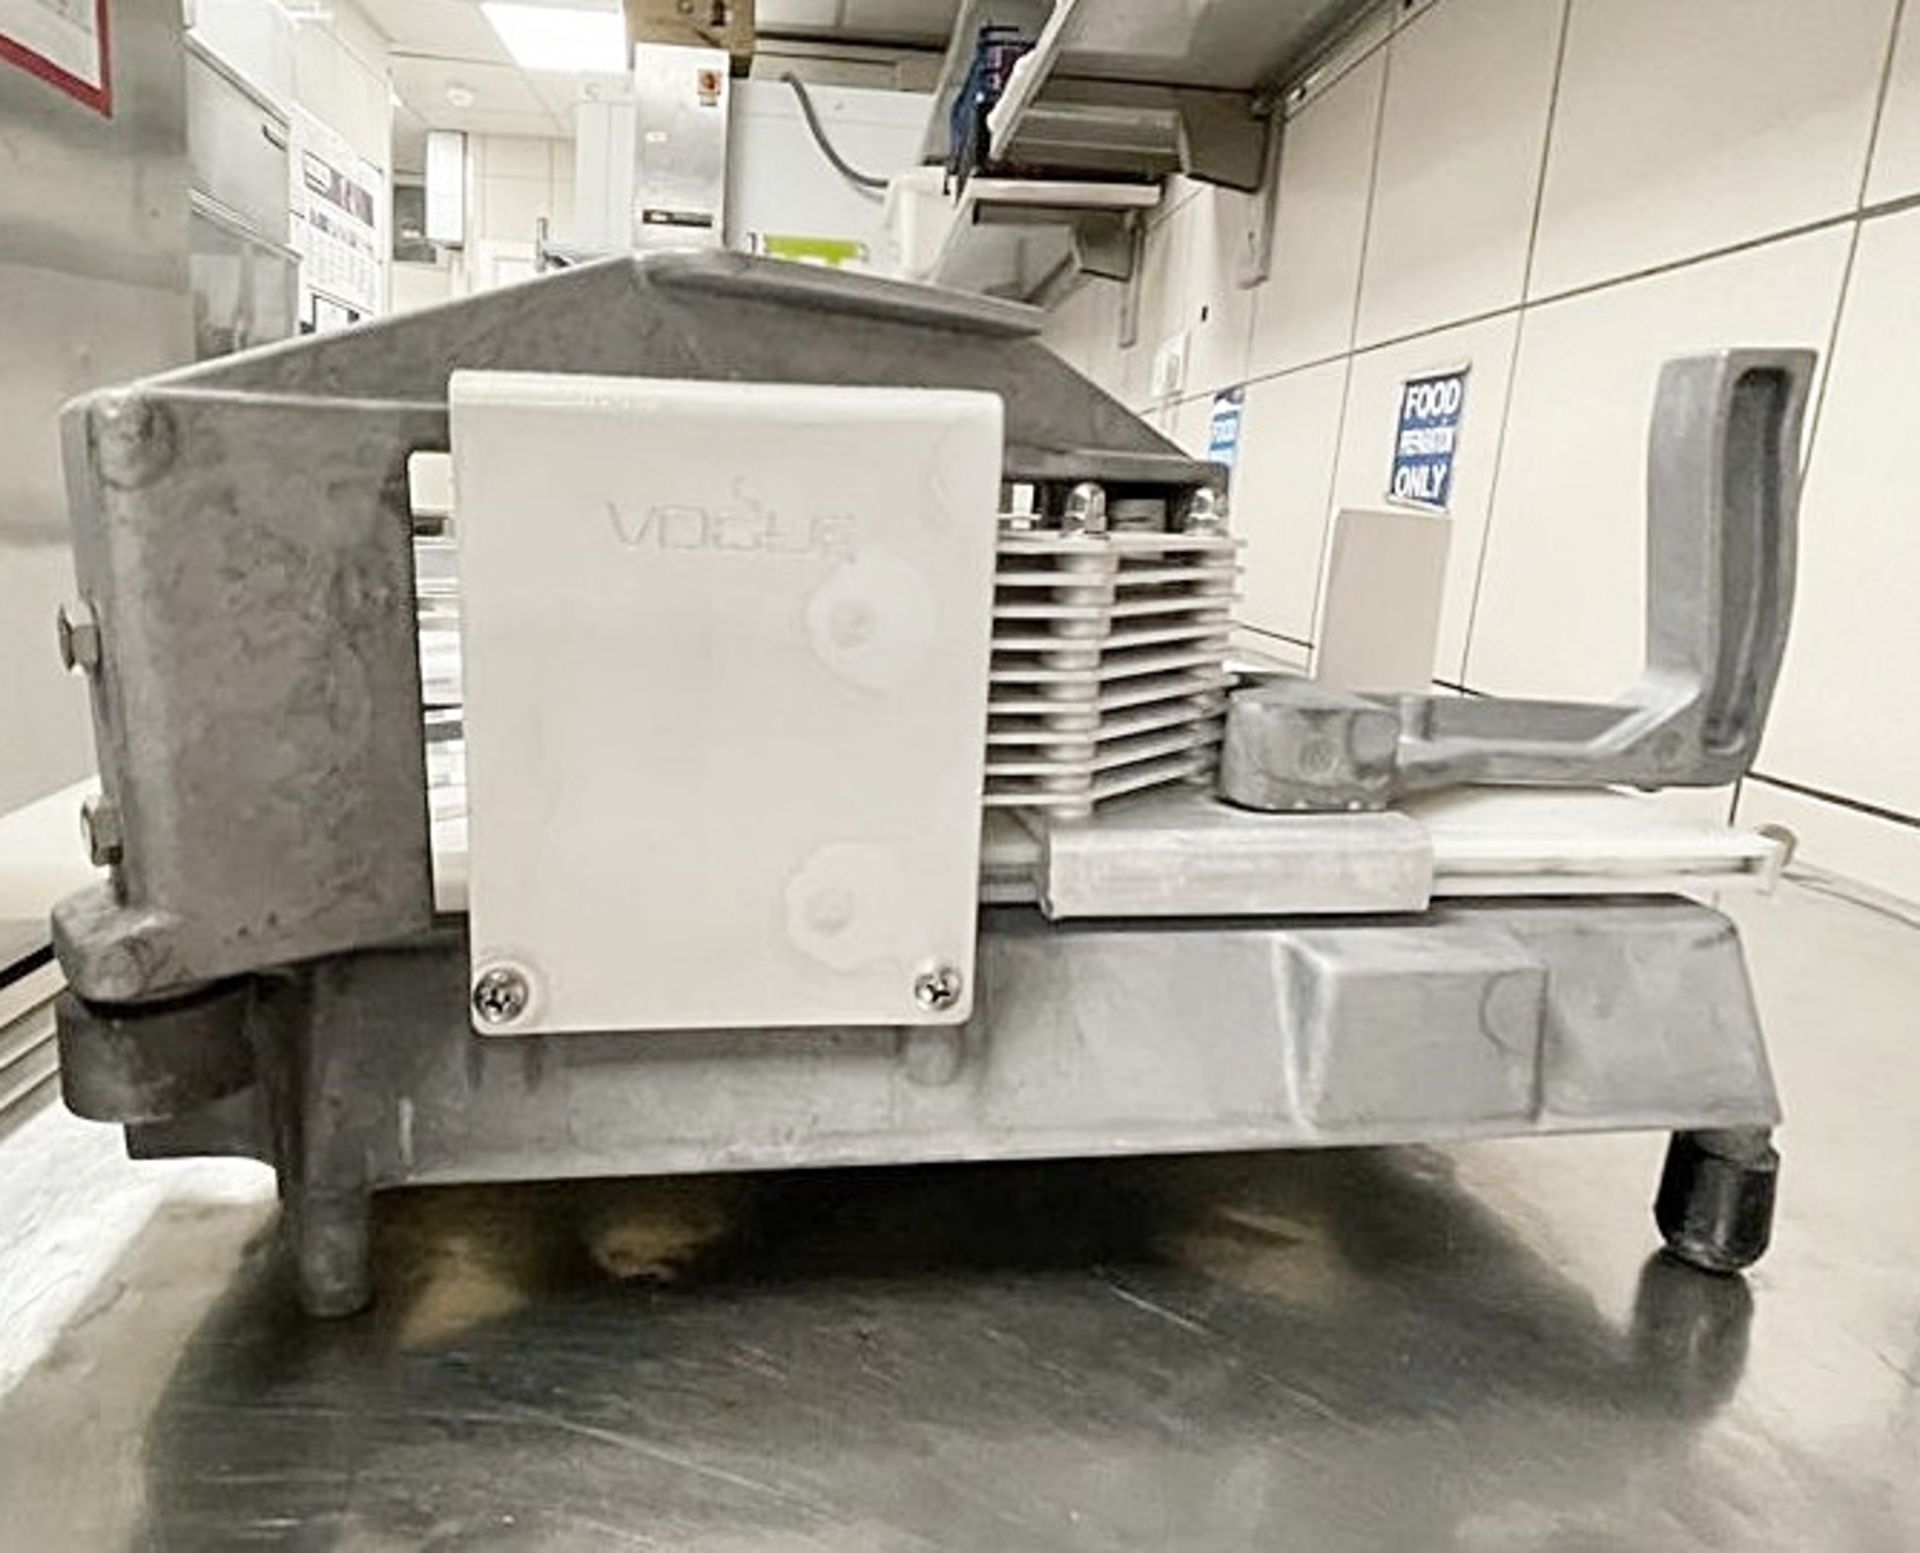 3 x Assorted Commercial Vegitable Slicers / Choppers - More Information To Follow - Ref: FPSD178 - - Image 2 of 4